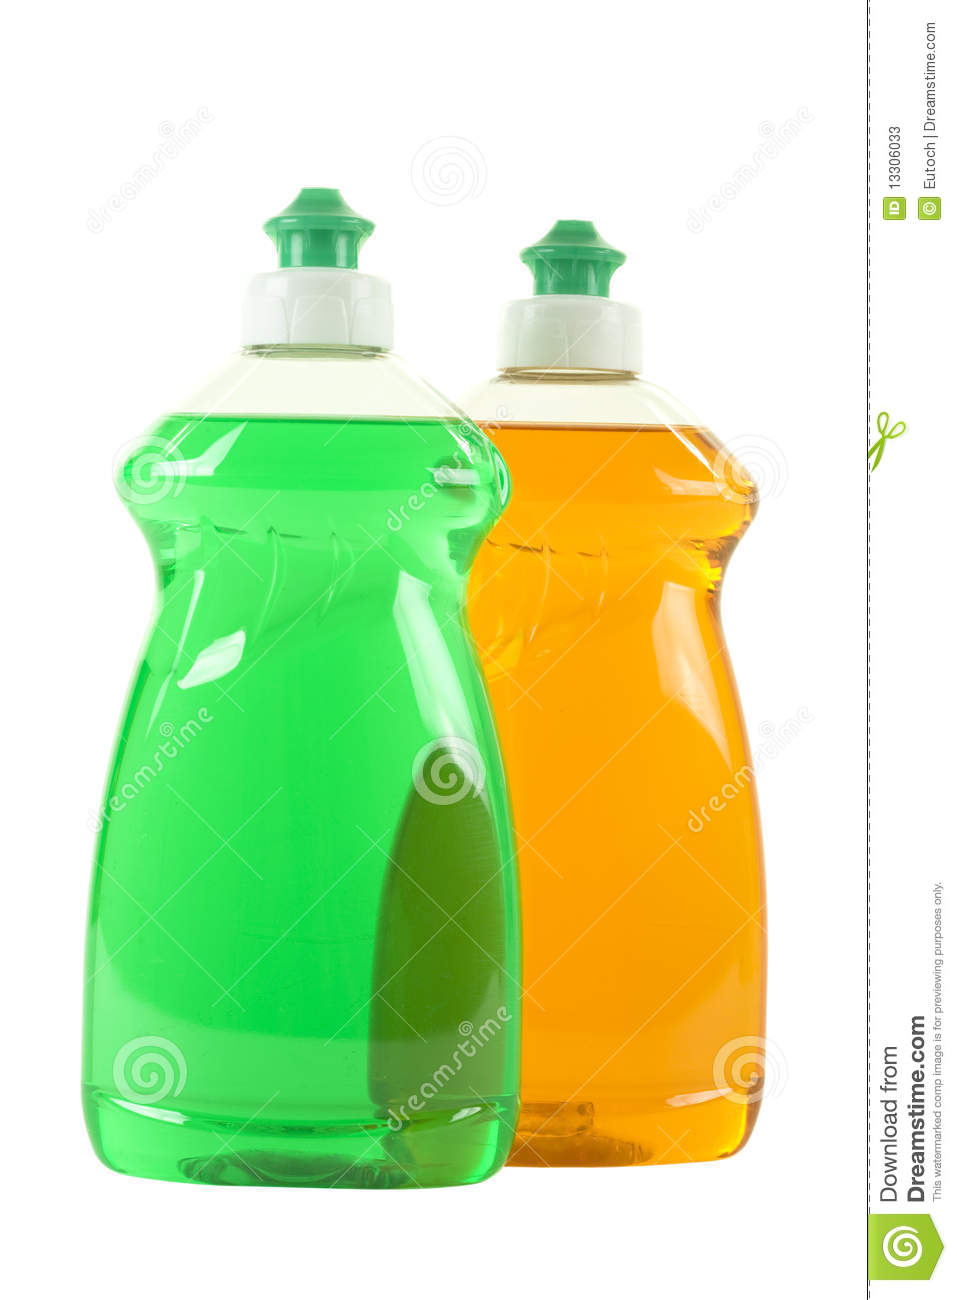 For Dish Soap Bottle Clipart Displaying 20 Images For Dish Soap